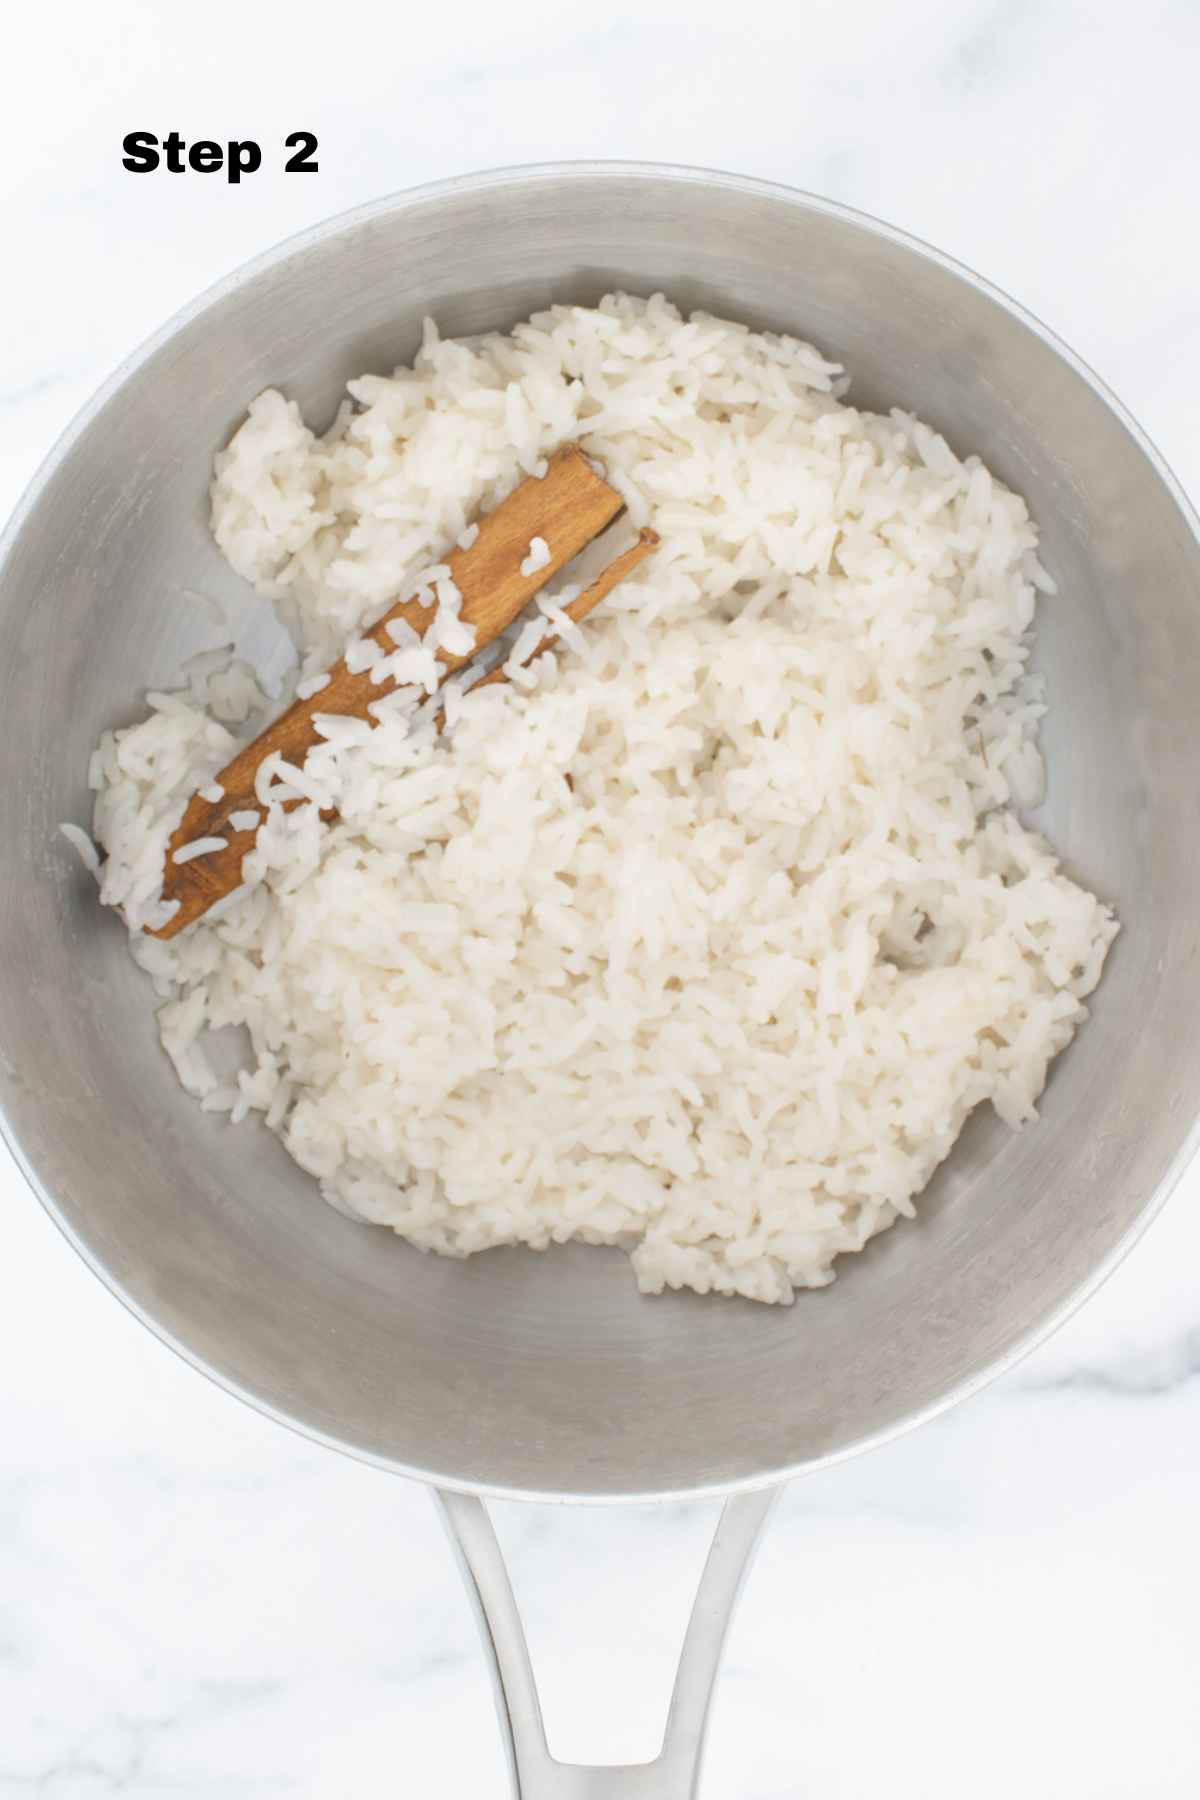 Cooked rice with cinnamon stick in cooking pot.